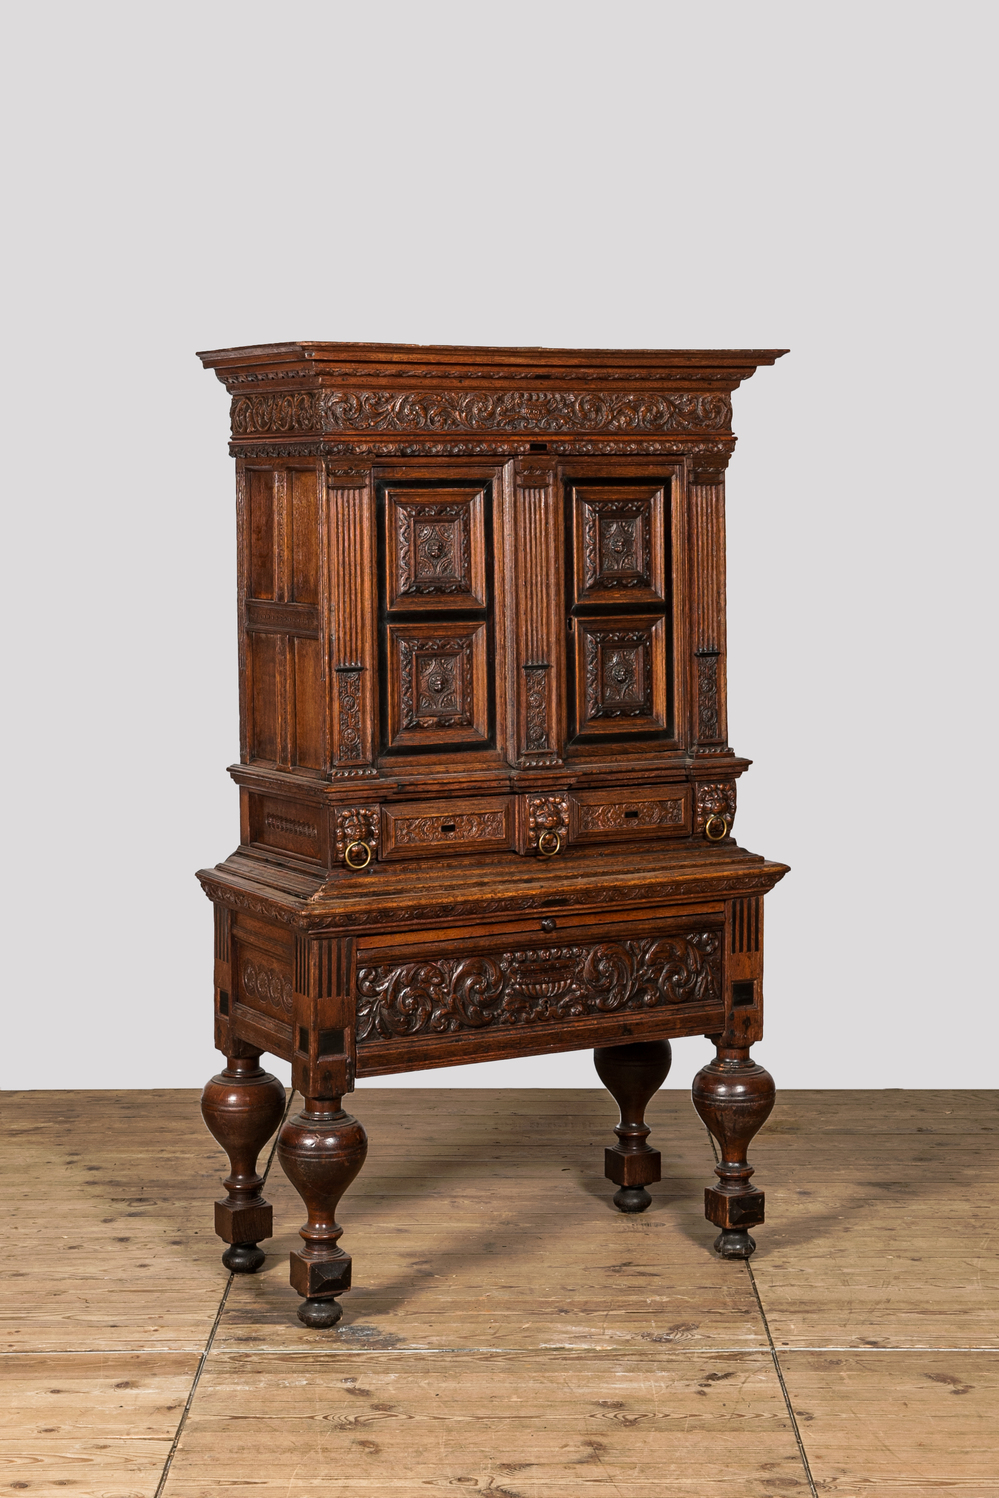 An oak and partly ebonised wooden cabinet on foot, 19th C. with older elements